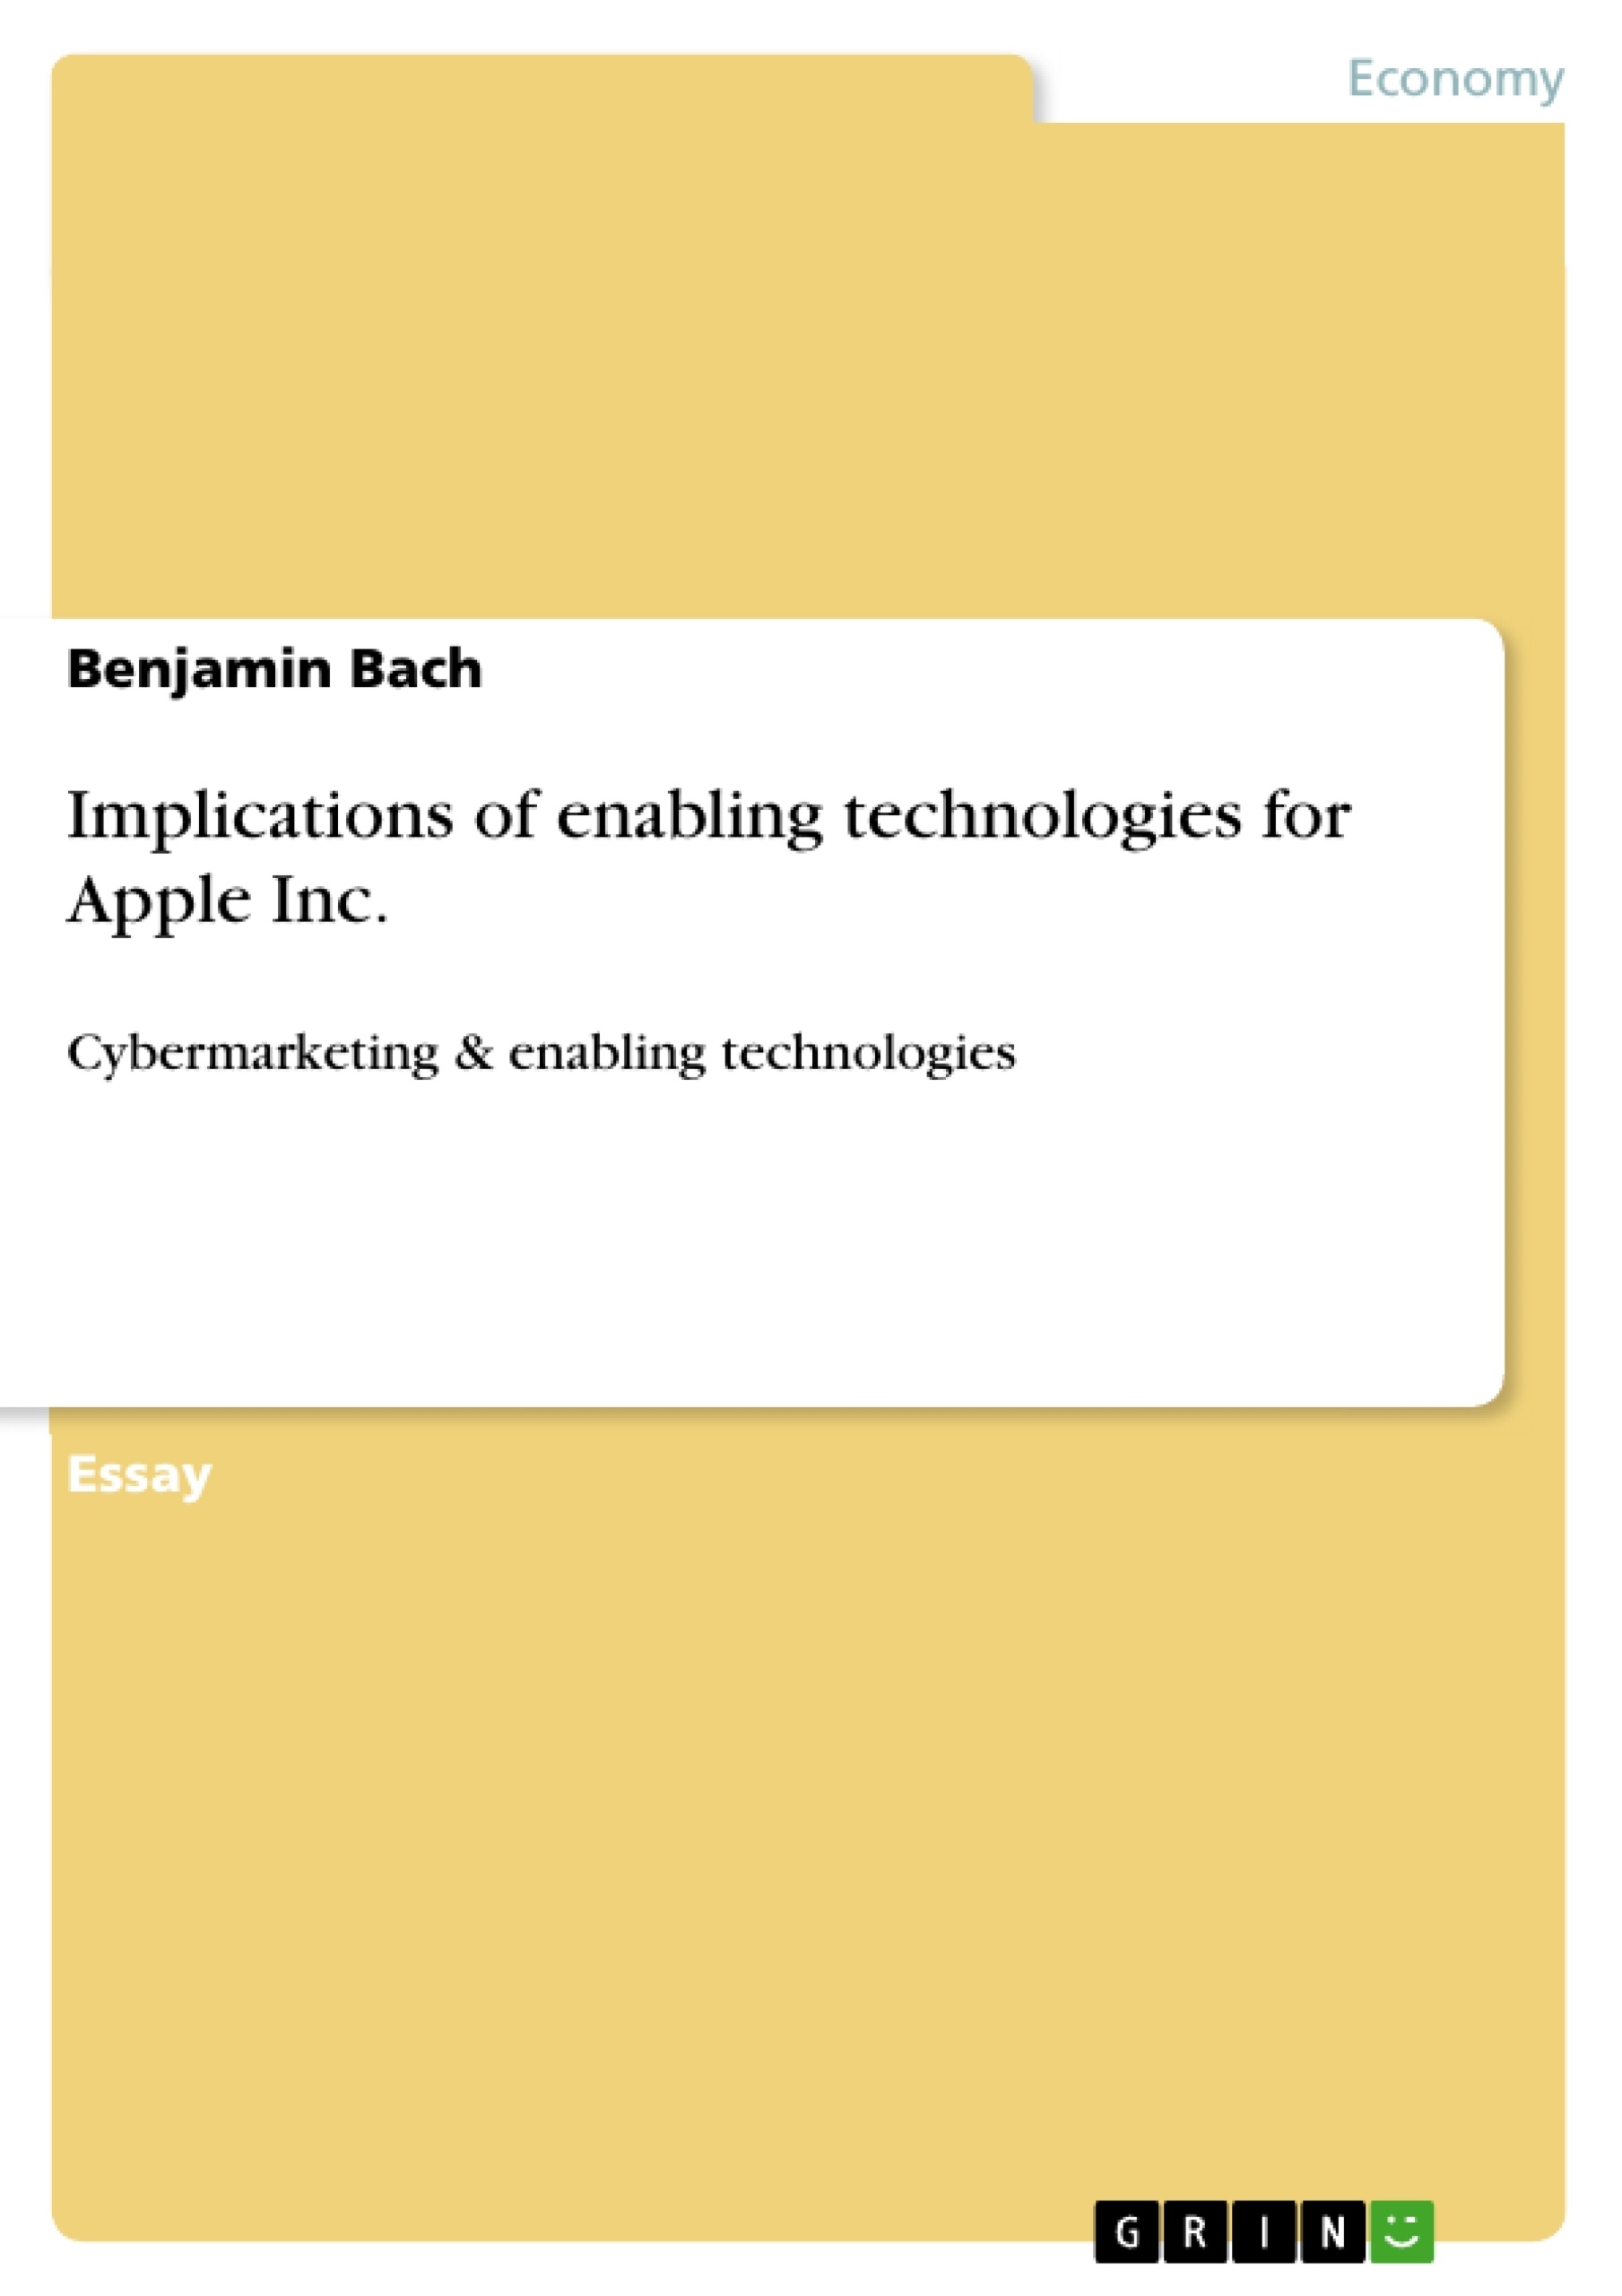 Title: Implications of enabling technologies for Apple Inc.